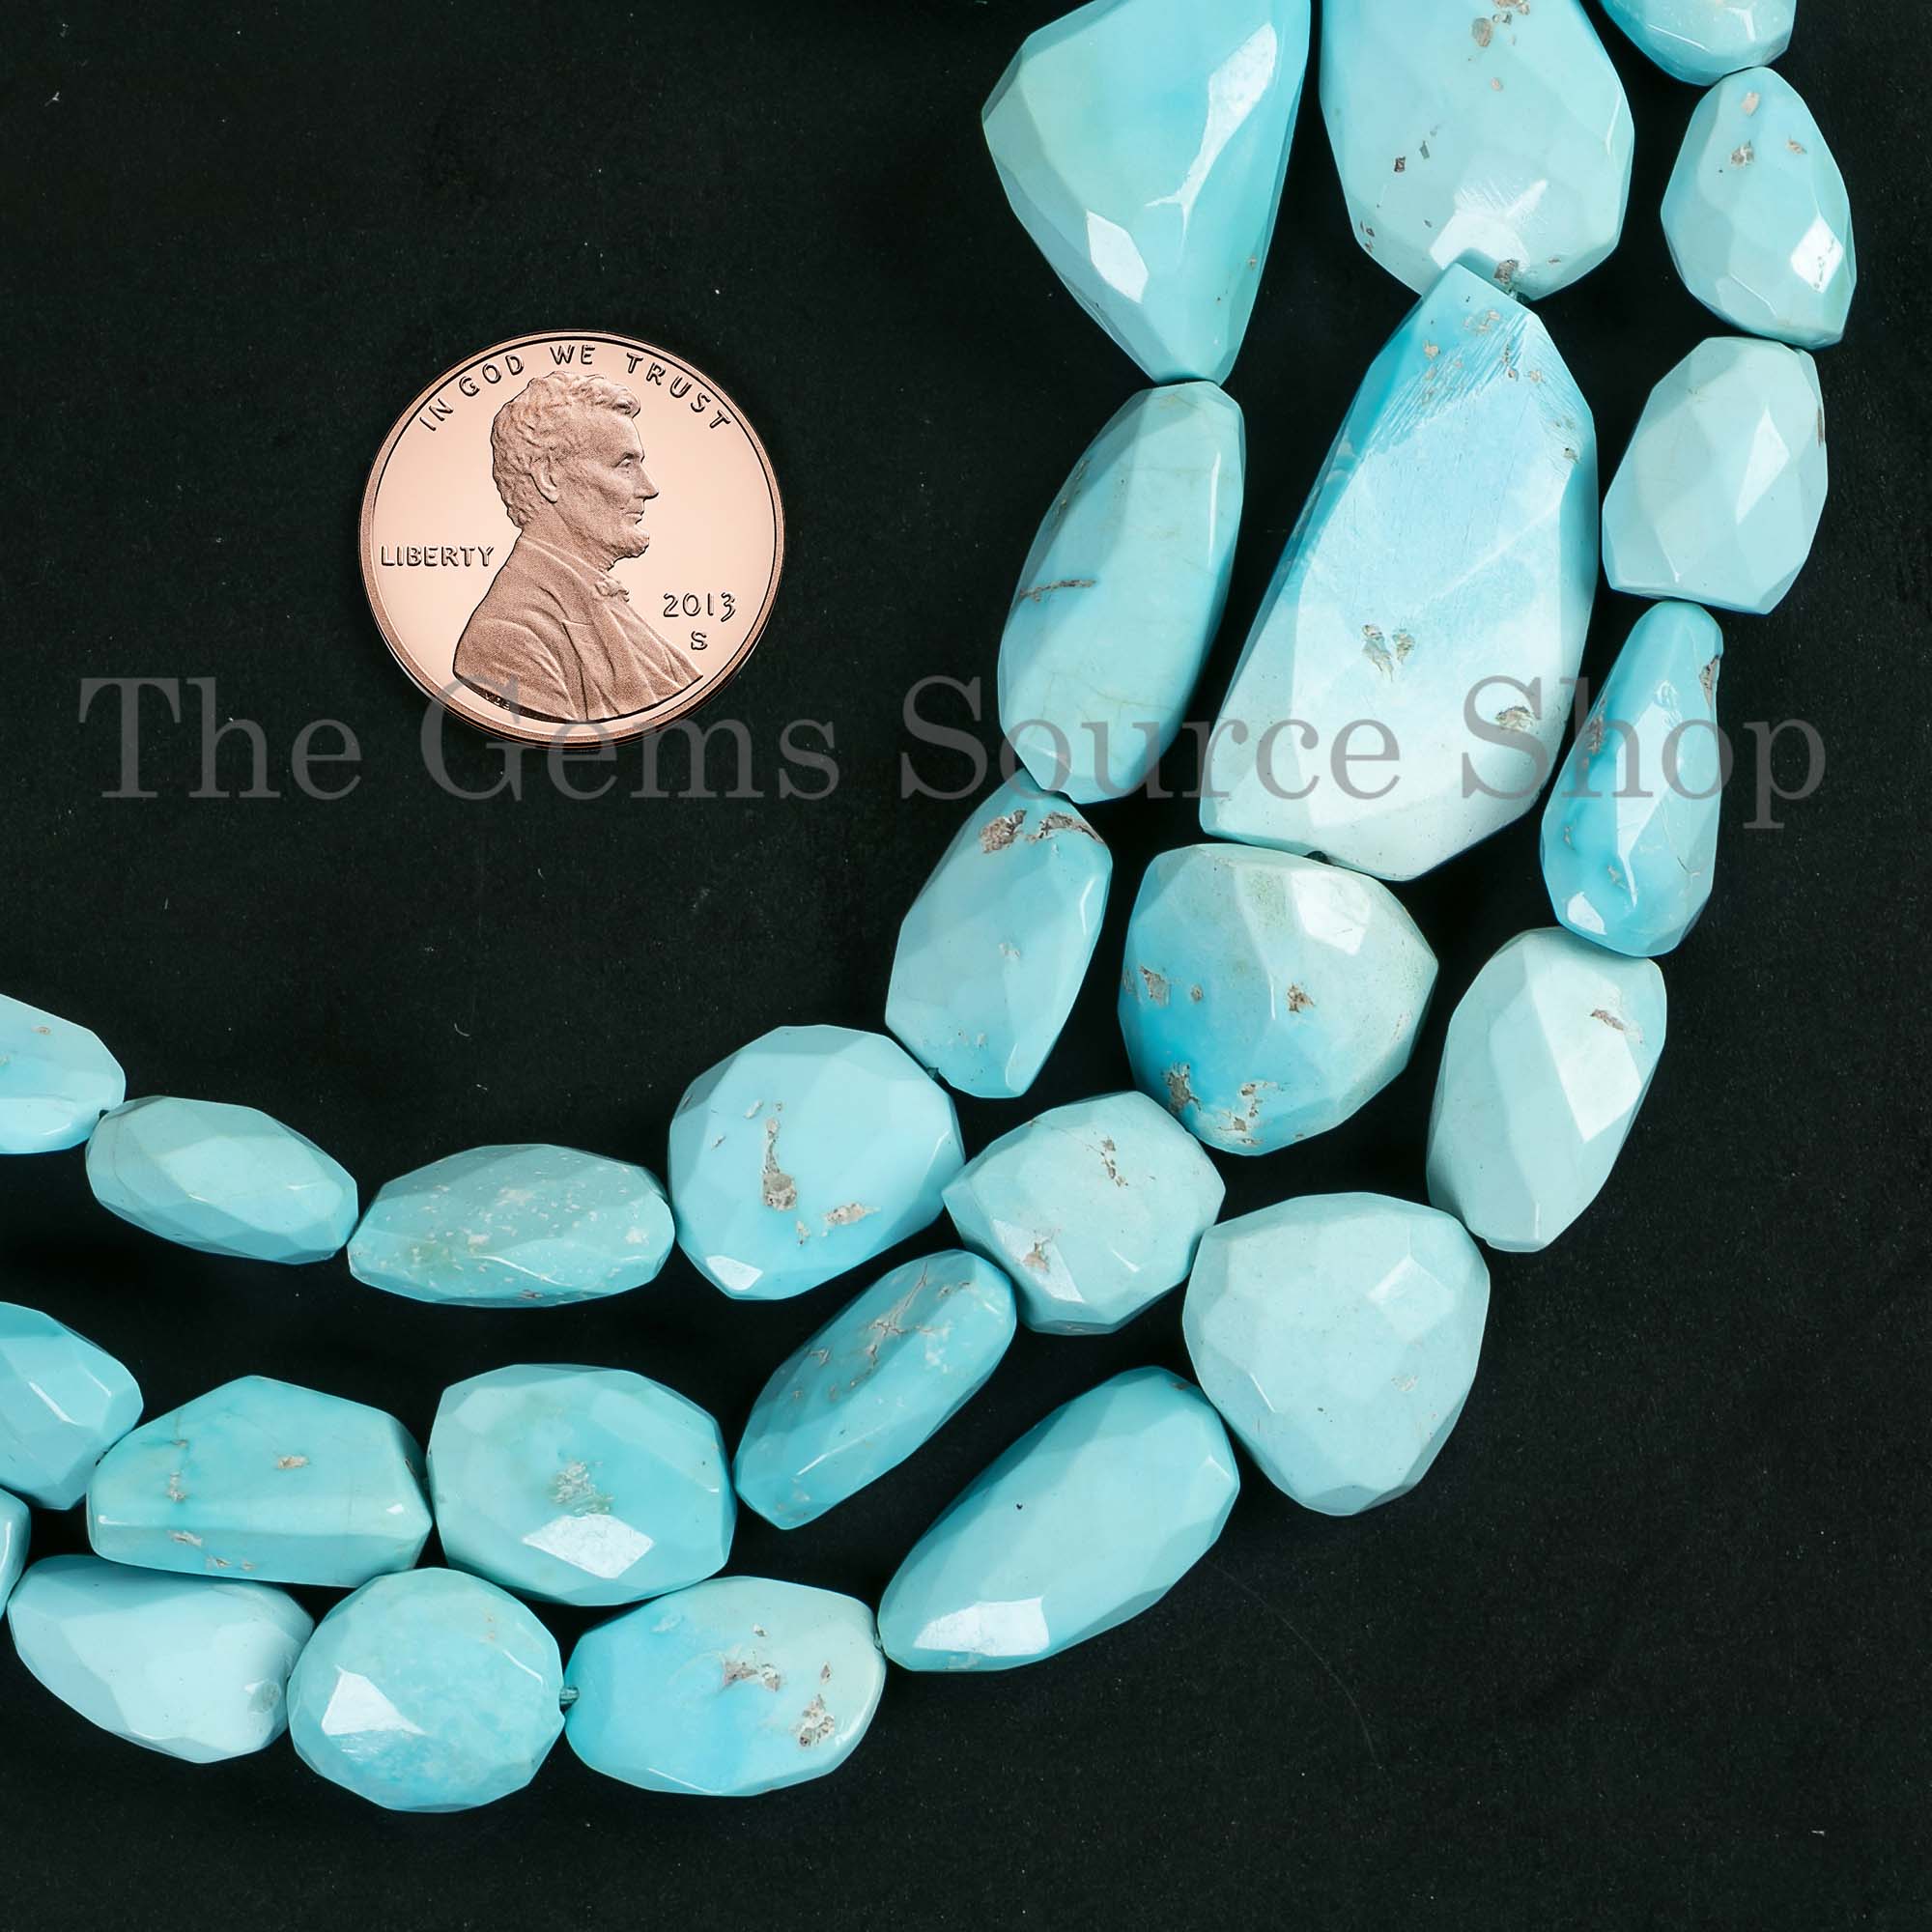 Turquoise Briolette Nuggets, Turquoise Fancy Tumbles, Loose Sleeping Beauty Turquoise Beads